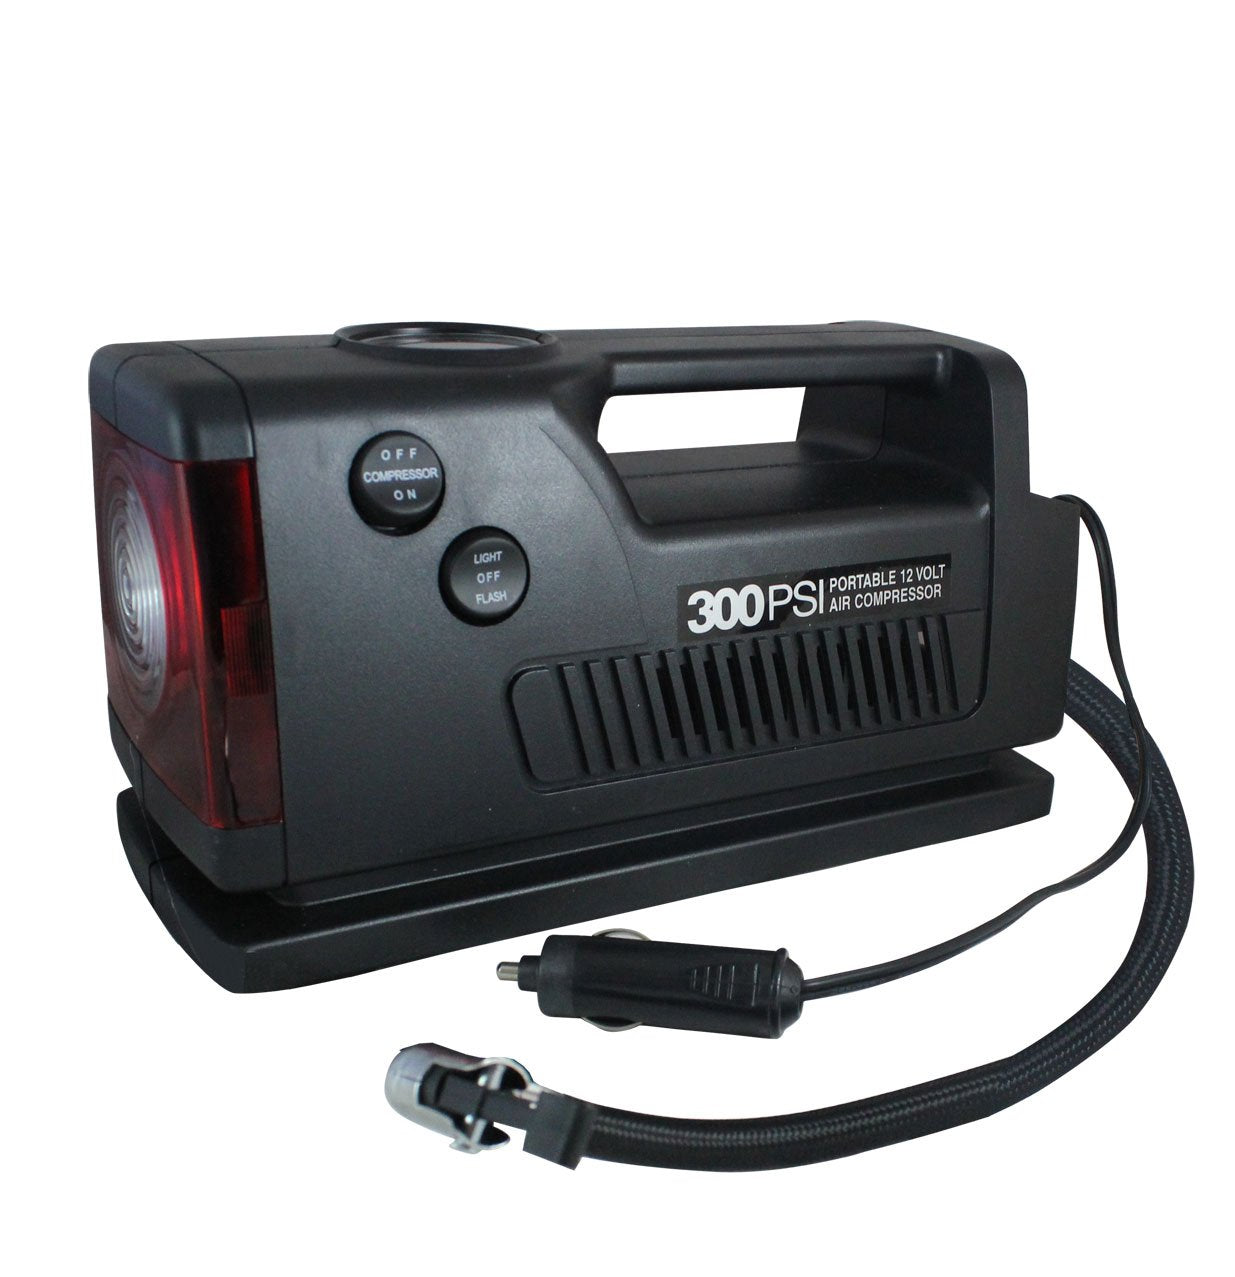 Coido 3326 Car Tyre Inflator with Torch, Emergency Flasher and 300